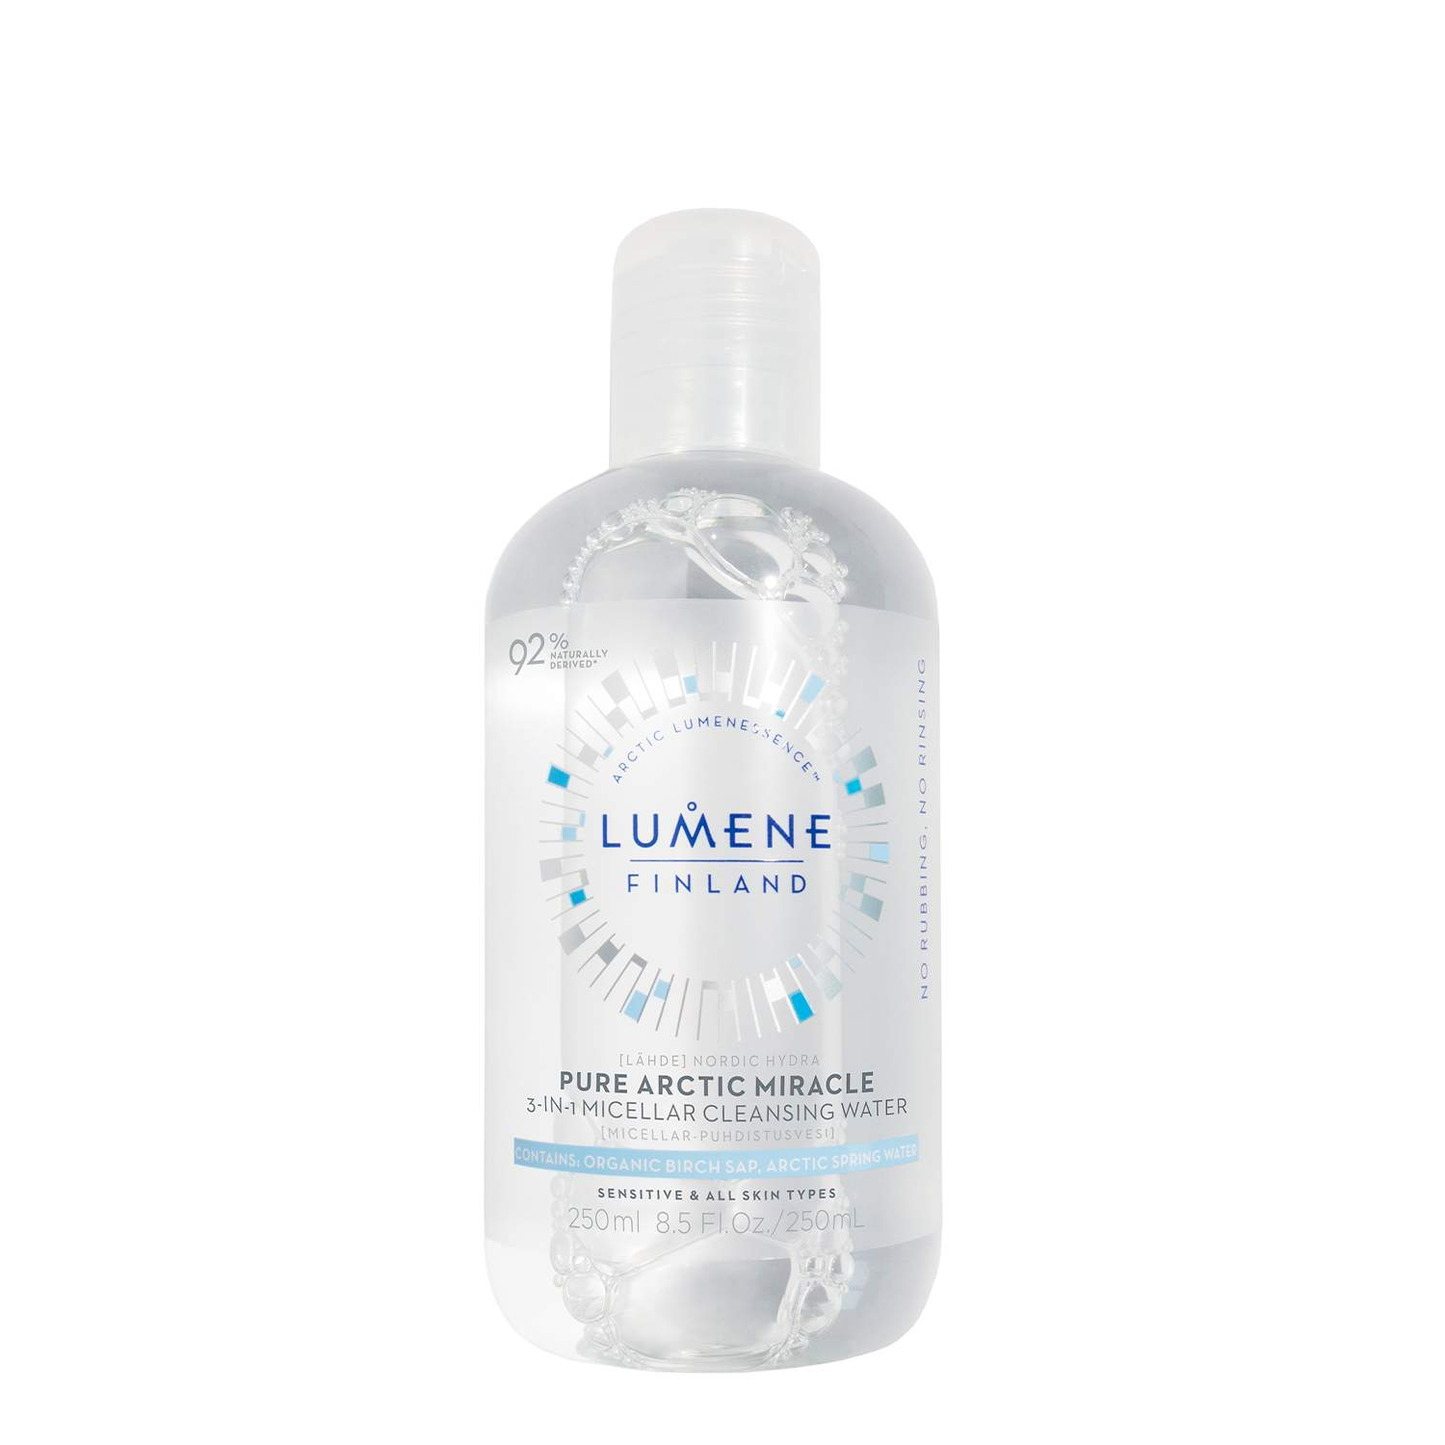 Lumene Nordic Hydra [Lähde] Pure Arctic Miracle 3-in-1 Micellar Cleansing Water